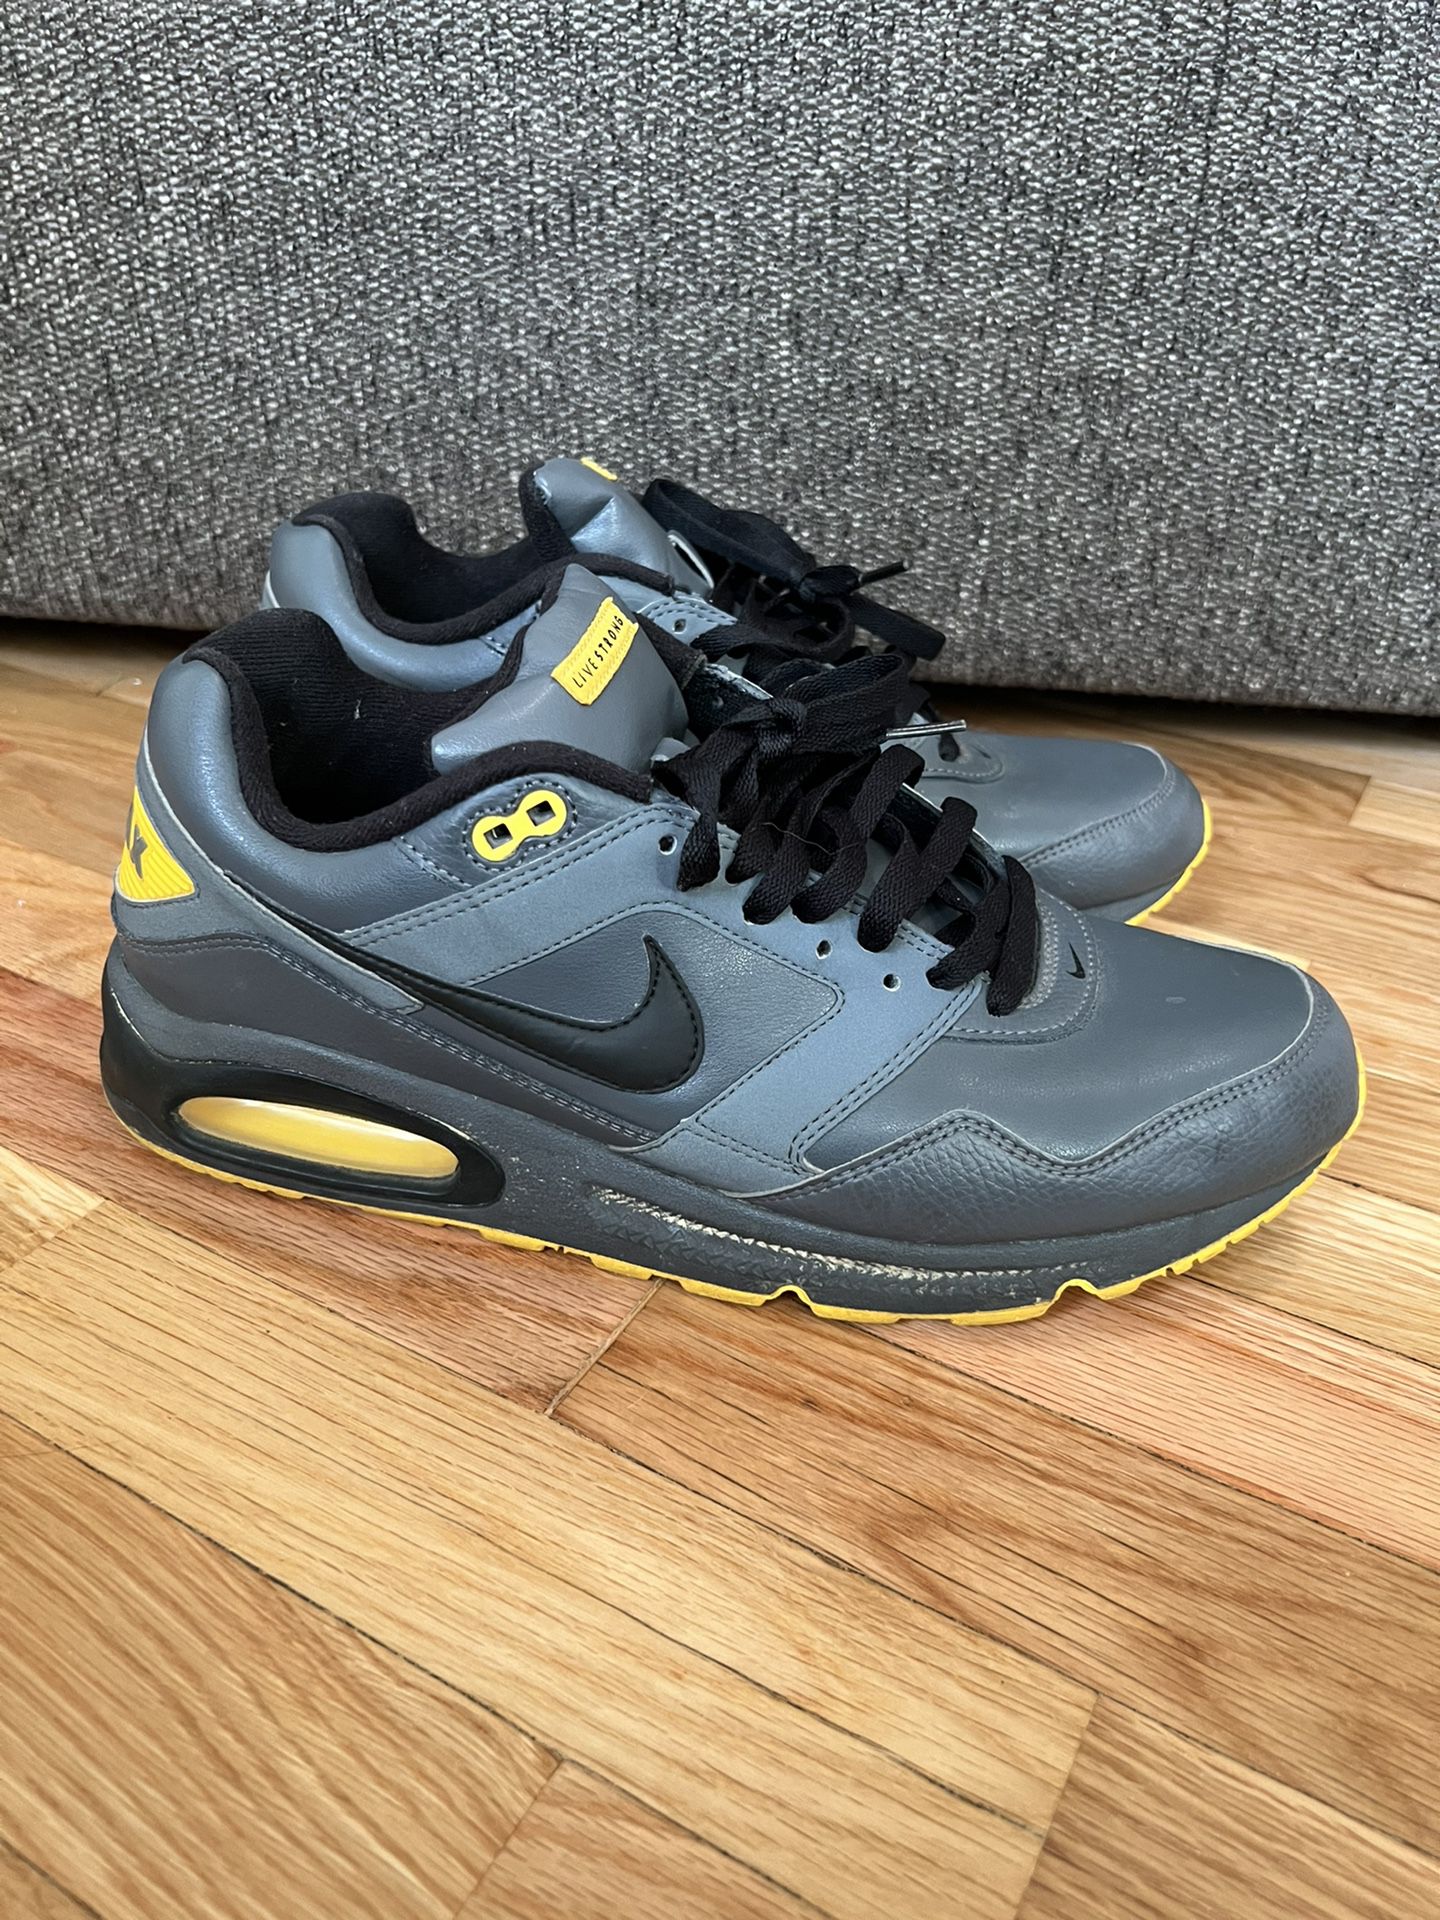 NIKE AIR MAX GREY SHOES SIZE for Sale in Tacoma, WA - OfferUp